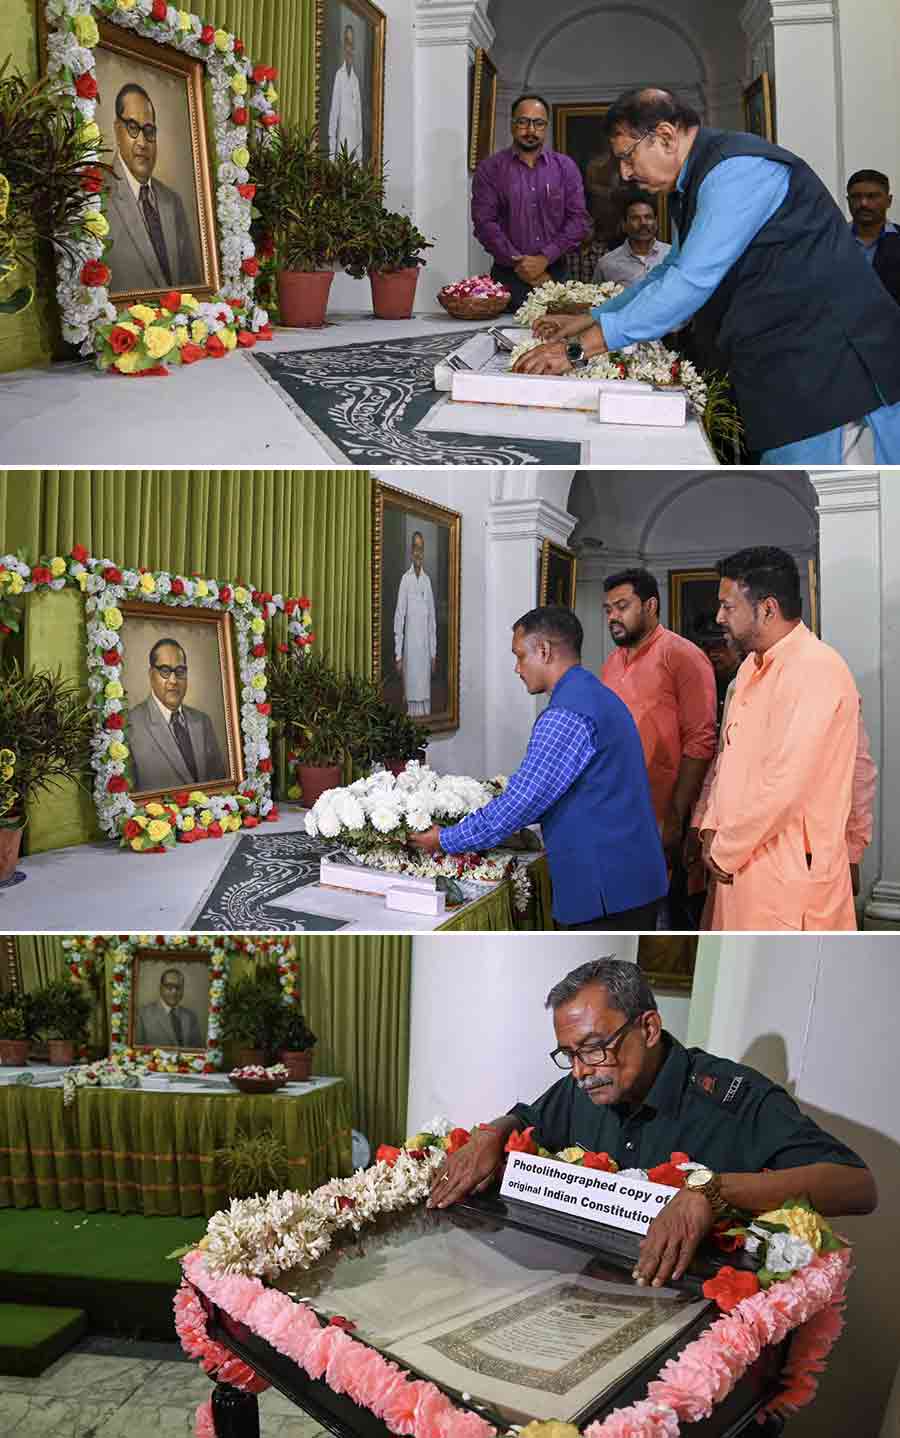 (FROM TOP) As part of the Constitution Day celebrations at the Legislative Assembly in Kolkata on November 26, Saturday, West Bengal Legislative Assembly Speaker Biman Banerjee and BJP MLAs pay tribute to B.R. Ambedkar, chairperson of the drafting committee of the Constitution; deputy marshall. West Bengal Legislative Assembly, Bholanath Mukherjee, takes a close look at a photolithographic copy of the original Constitution at the event. Constitution Day is celebrated on November 26 to mark the date of adoption of the Indian Constitution in 1949. It came into effect on January 26, 1950